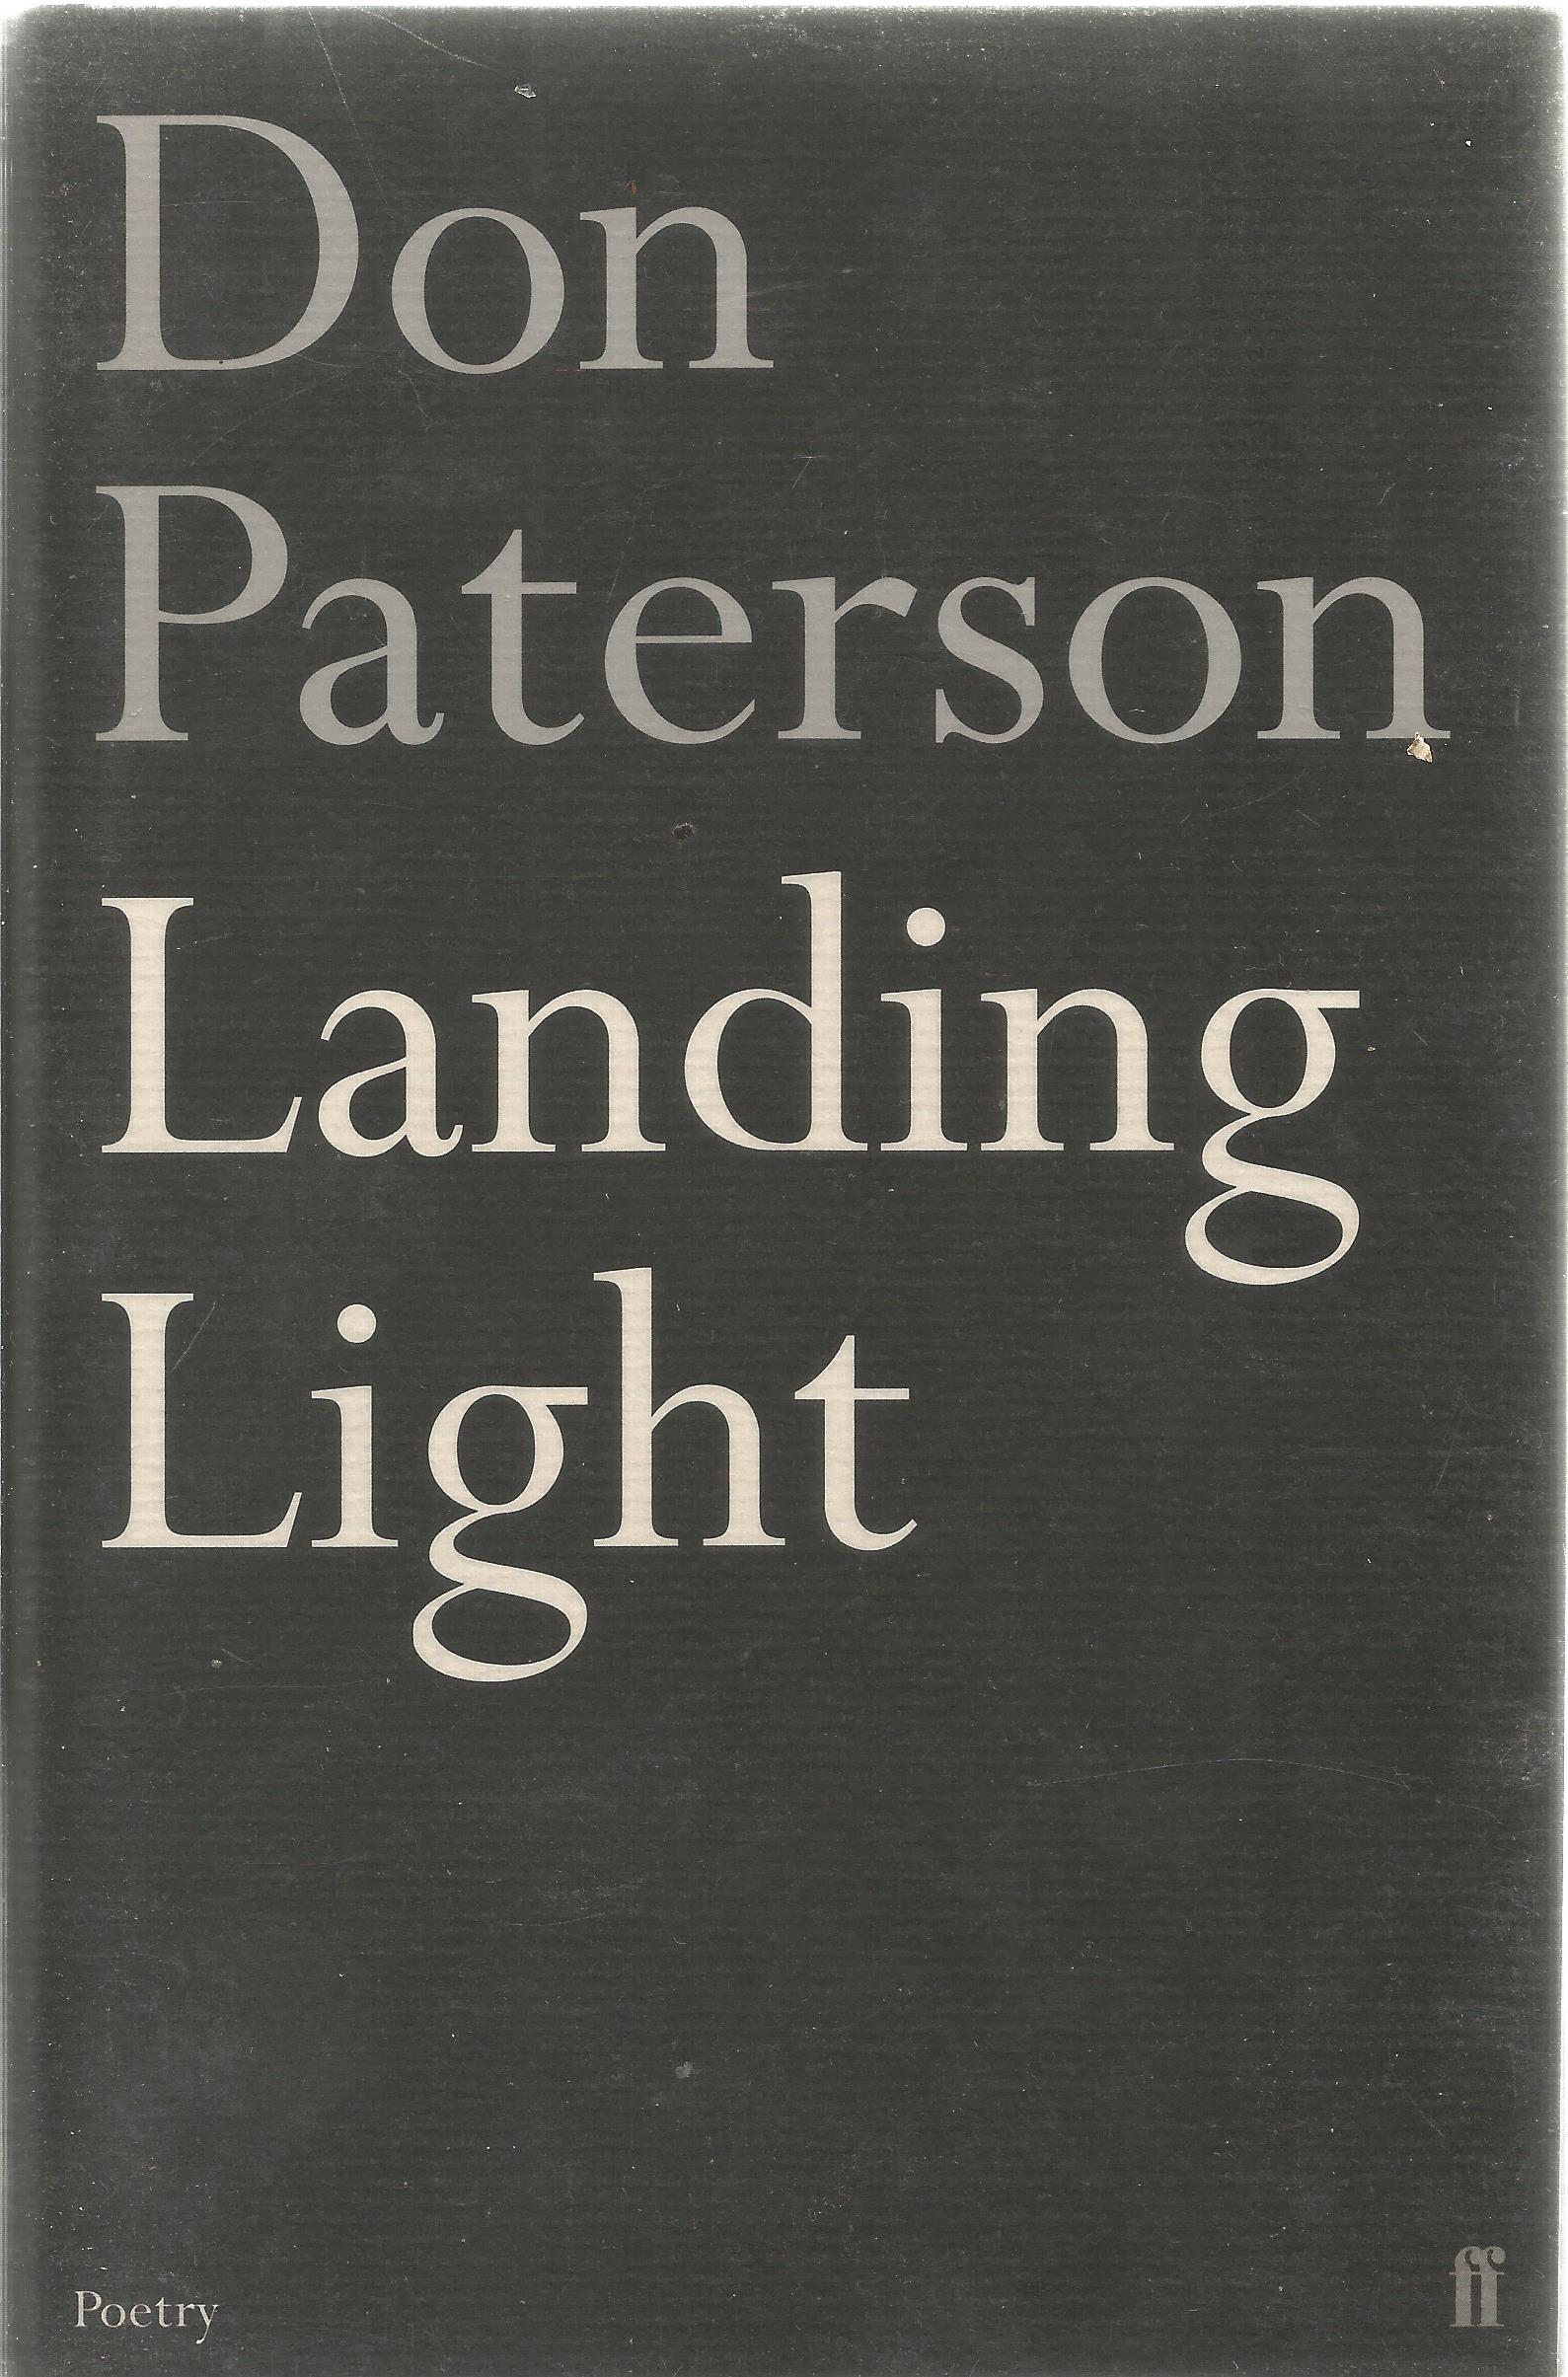 Landing Light by Don Paterson Hardback Book 2003 First Edition published by Faber and Faber Ltd some